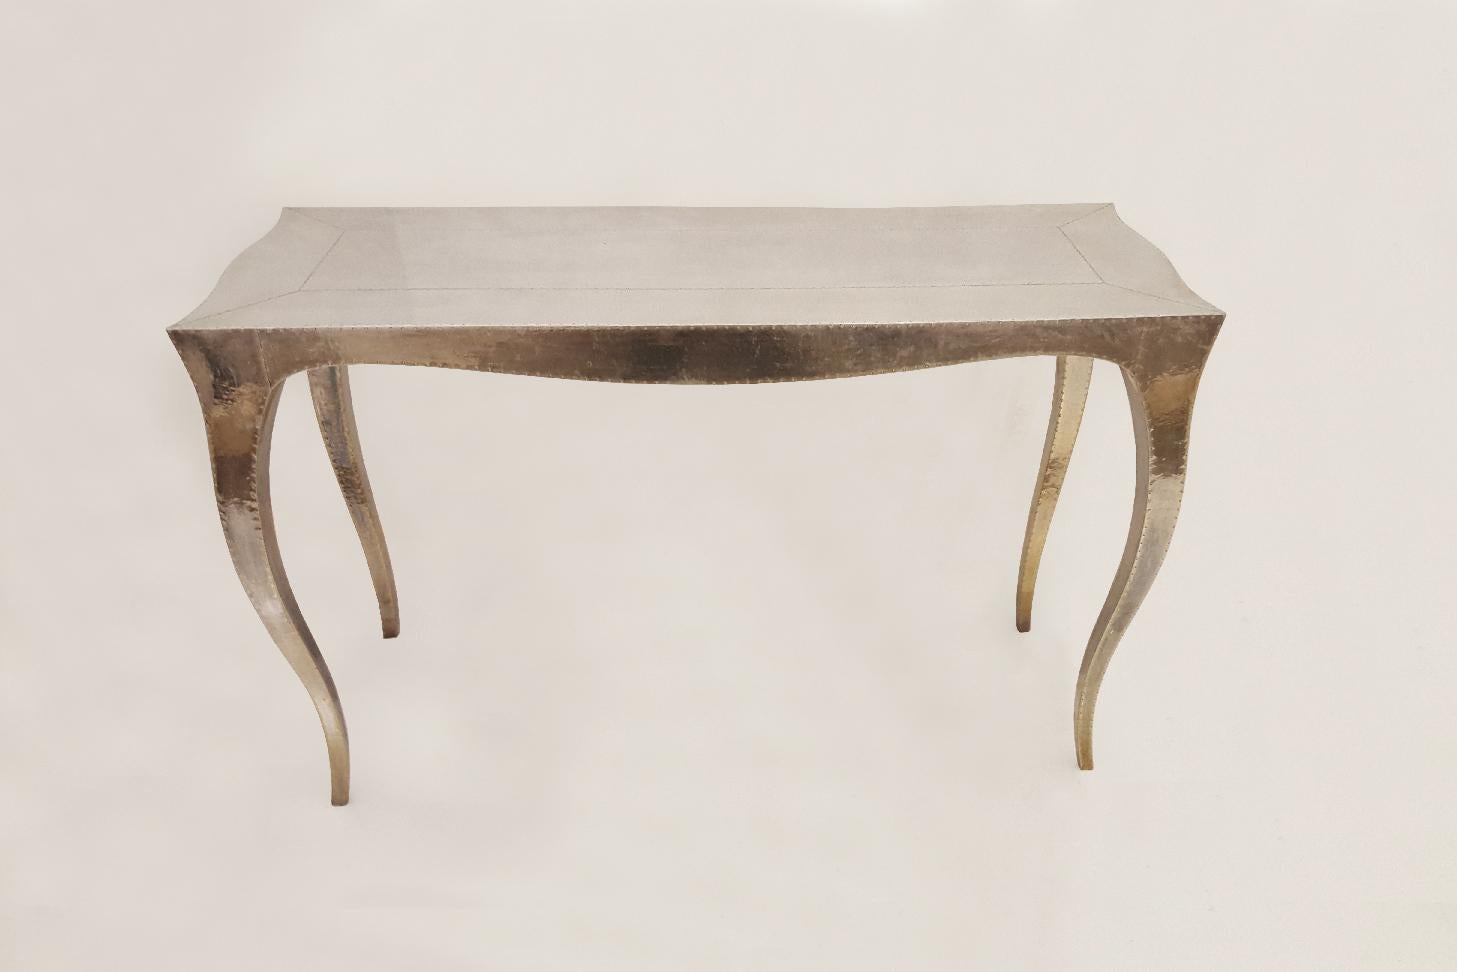 Louise Console Art Deco Industrial and Work Tables Mid. Hammered Copper  For Sale 5